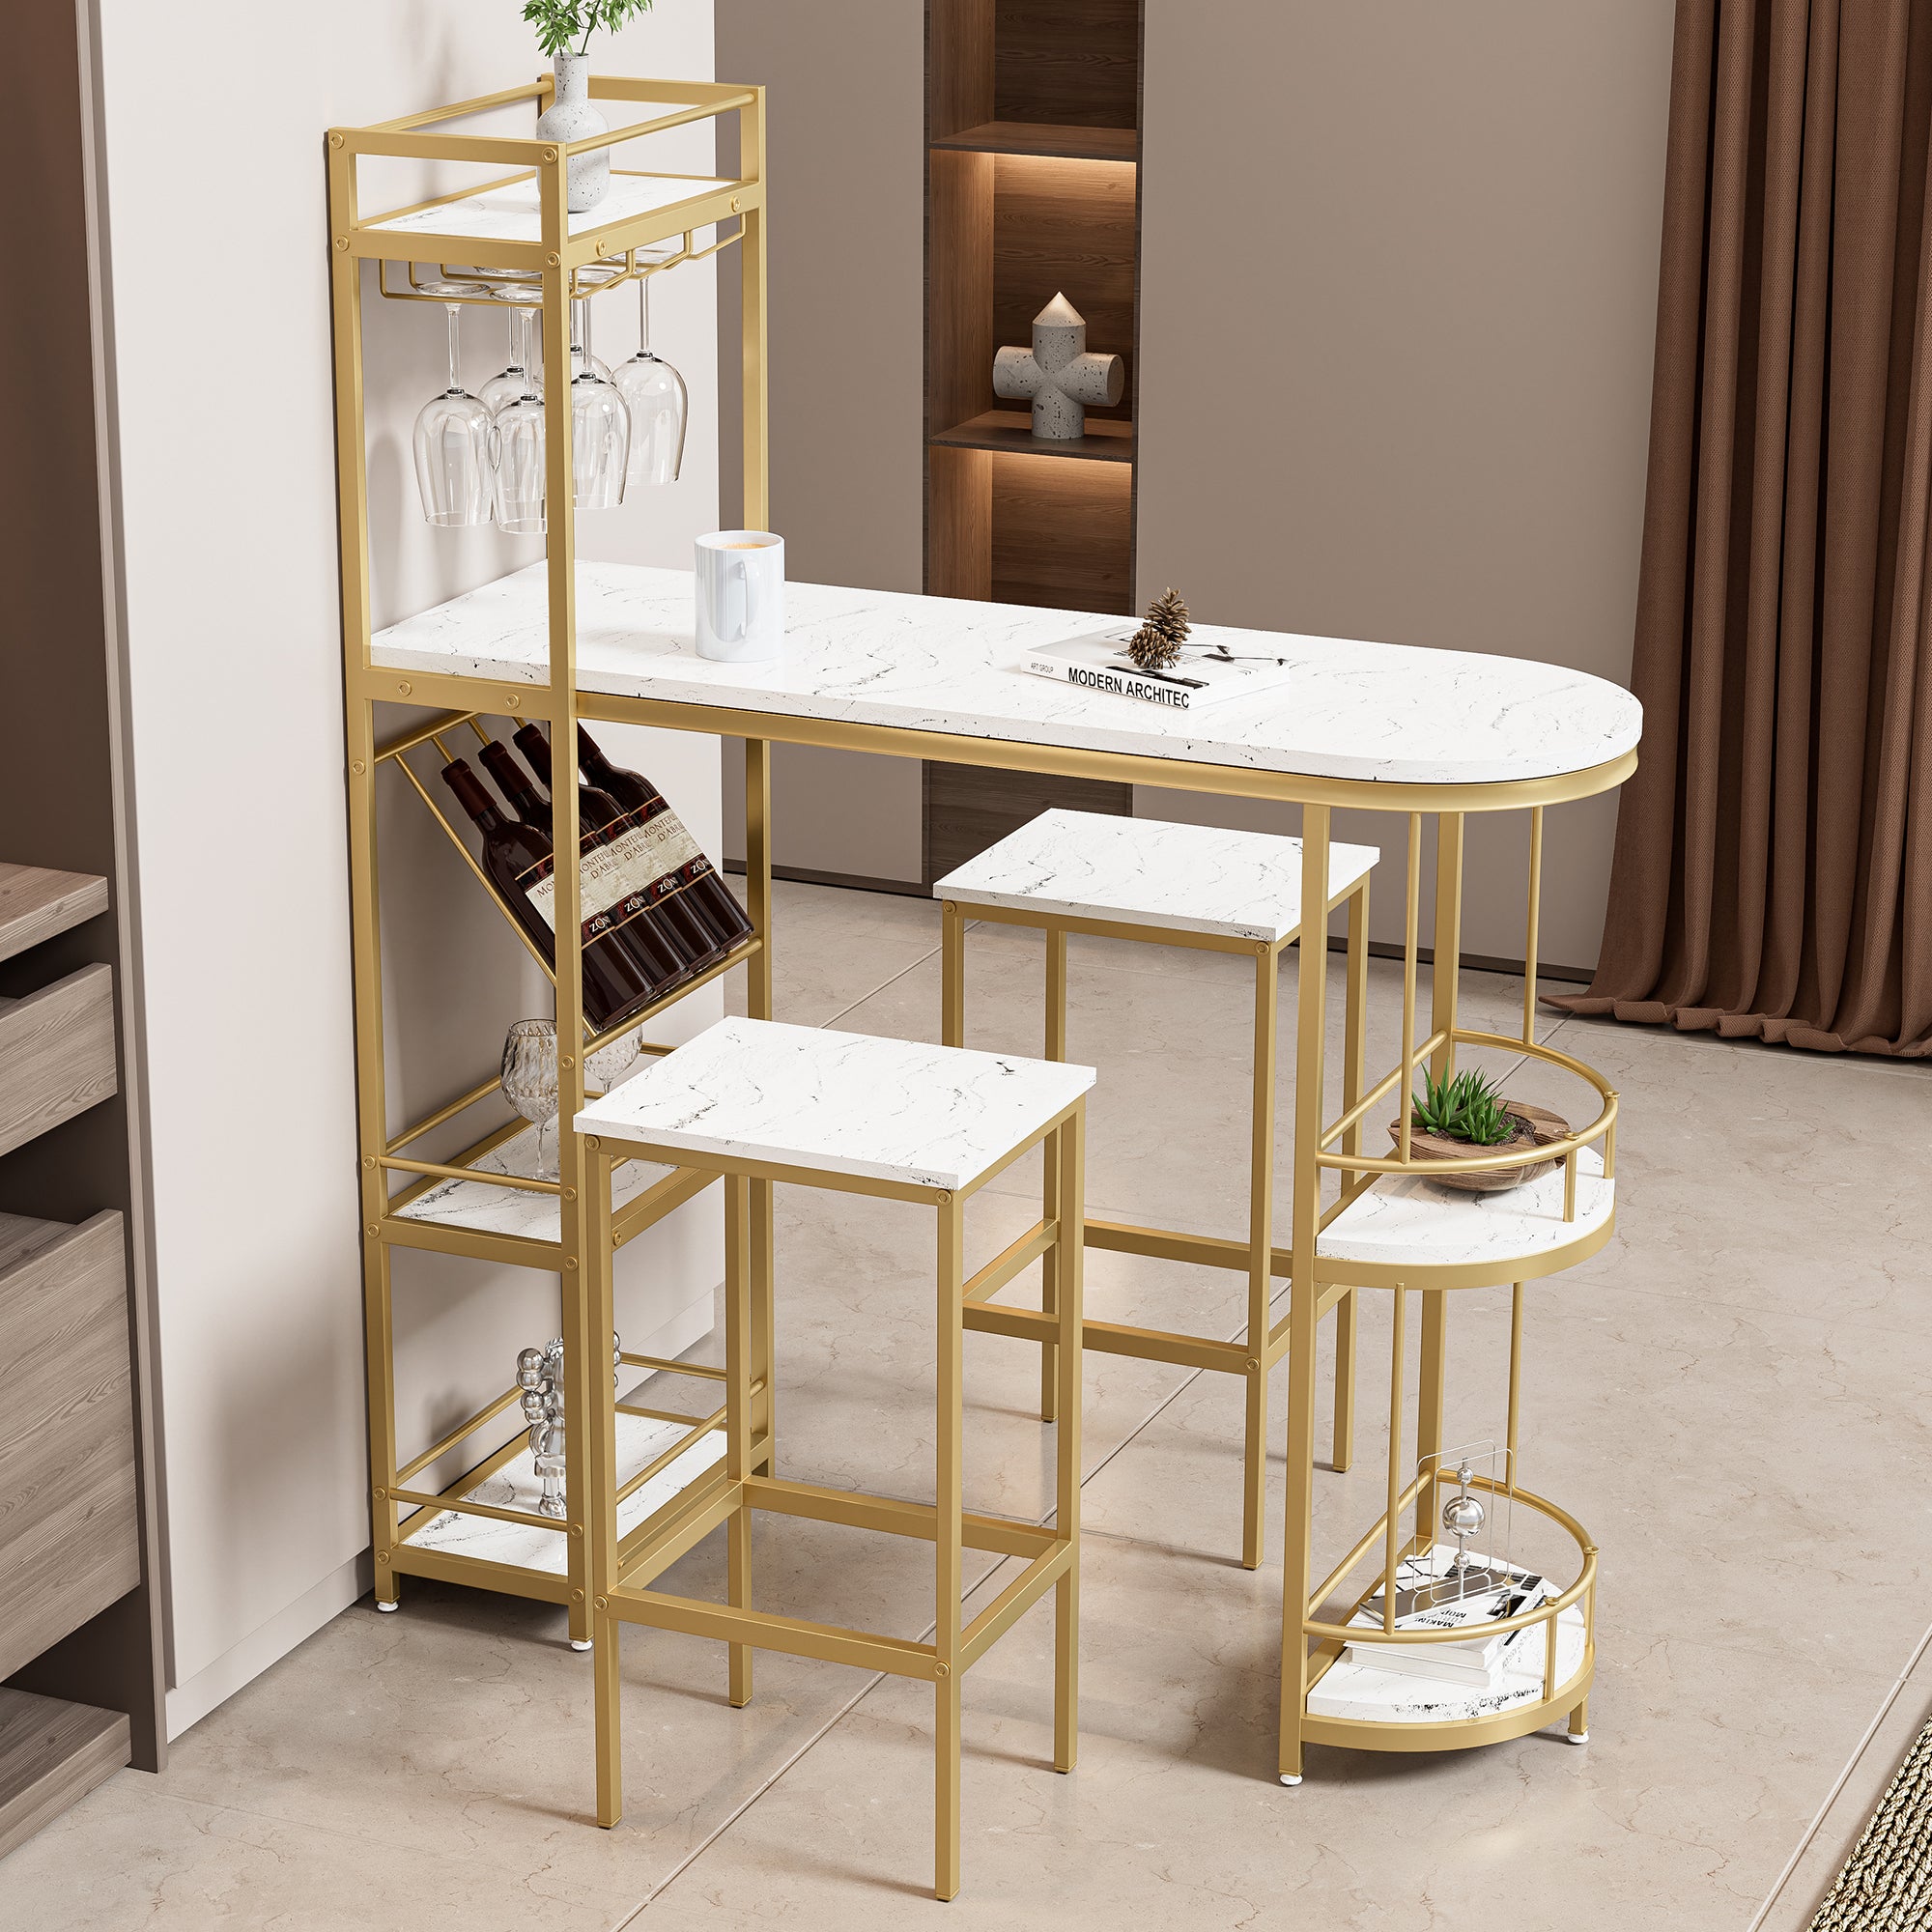 🆓🚛 3 Pcs Bar Table and Chairs Set, Modern White Kitchen Bar Height Dining Table Wood Breakfast Pub Table With Gold Base With Shelves, Glass Rack, Wine Bottle Rack, With 2 Bar Stools